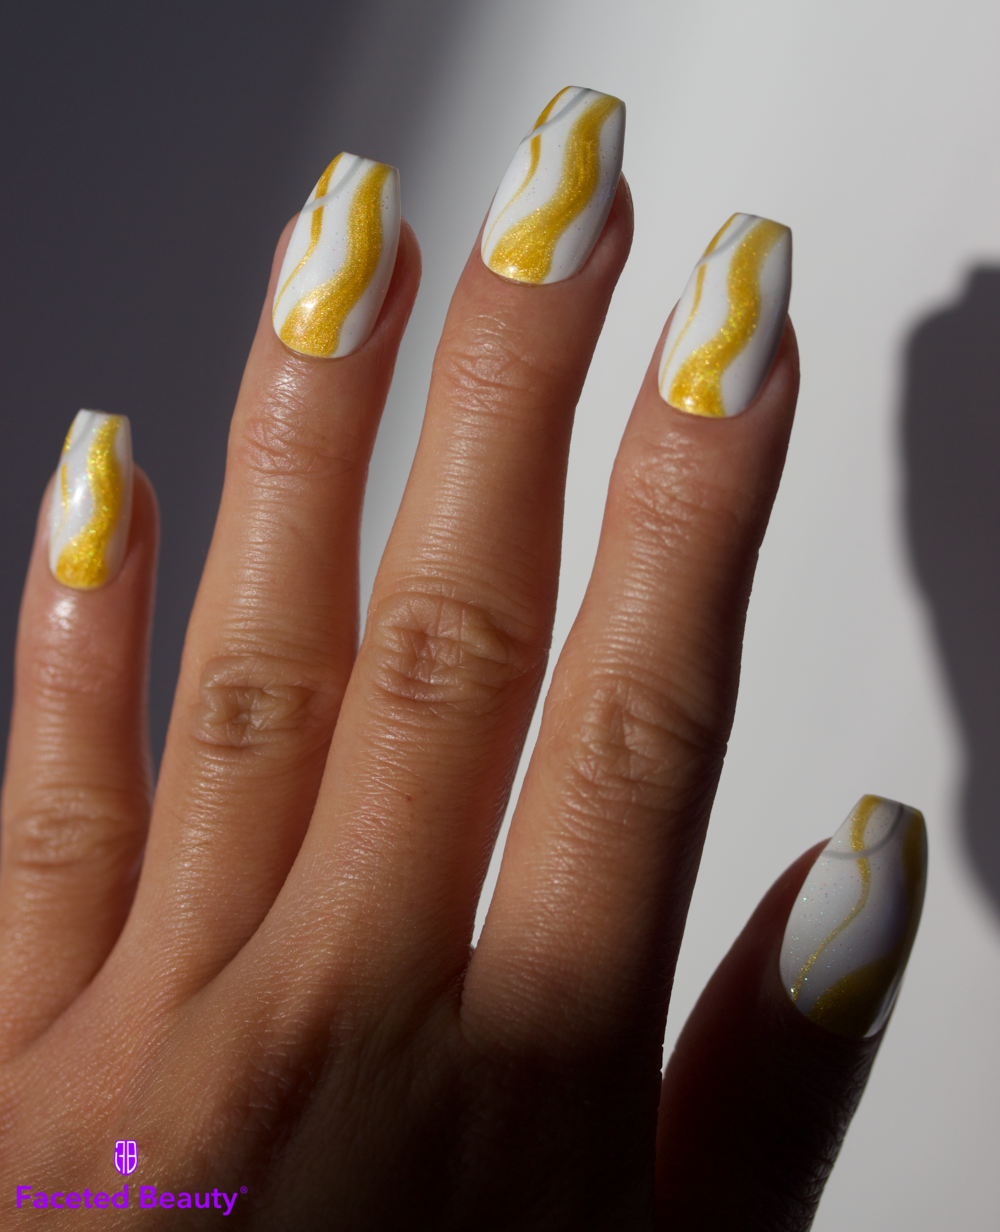 Model wearing white and gold nails.